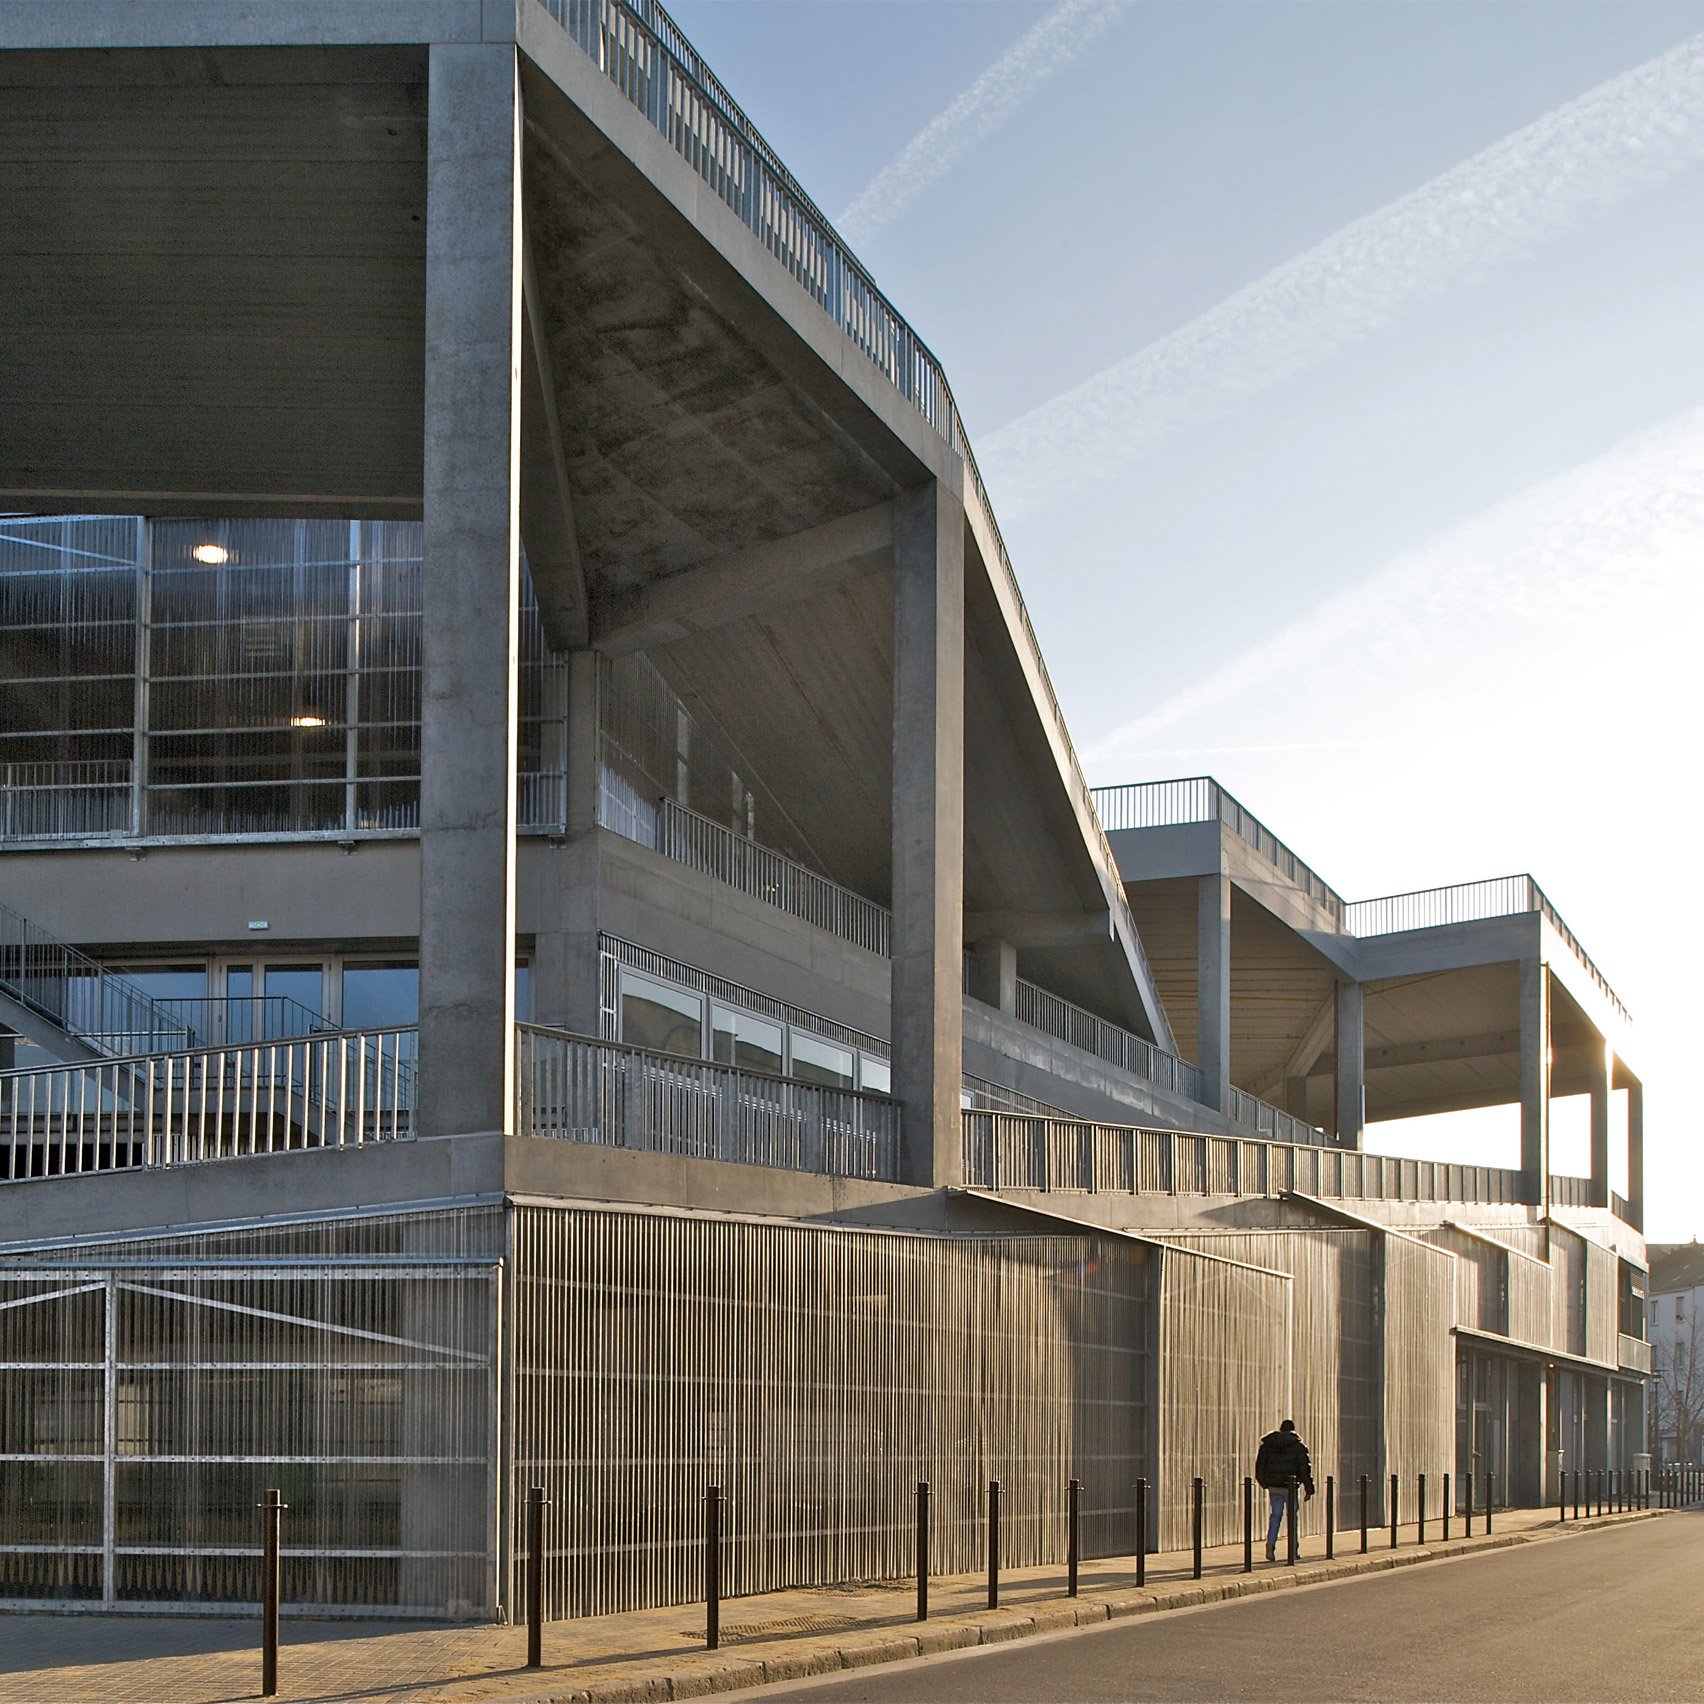 The concrete and metal exterior of a school in France